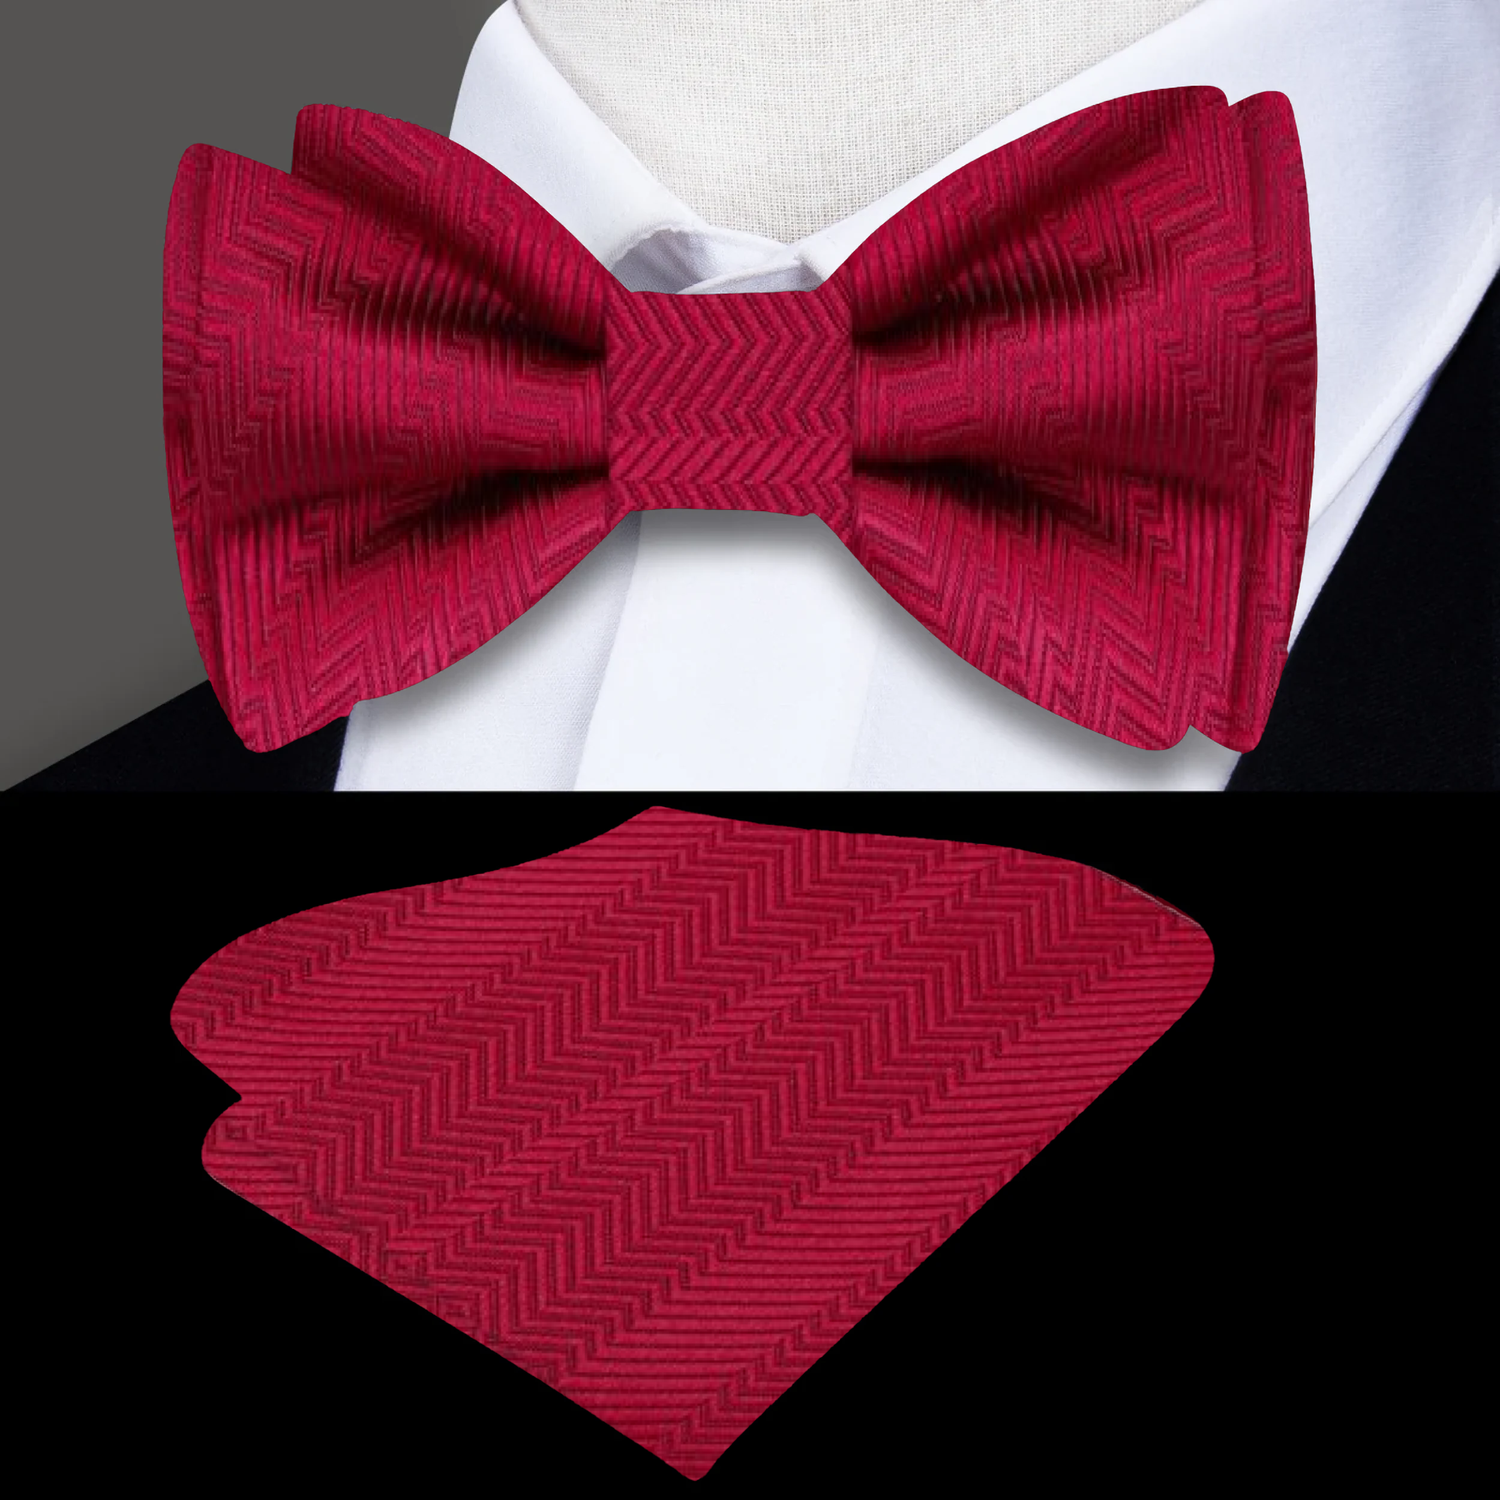 Main: A Rosewood Solid Pattern Self Tie Bow Tie, Matching Pocket Square||Rosewood